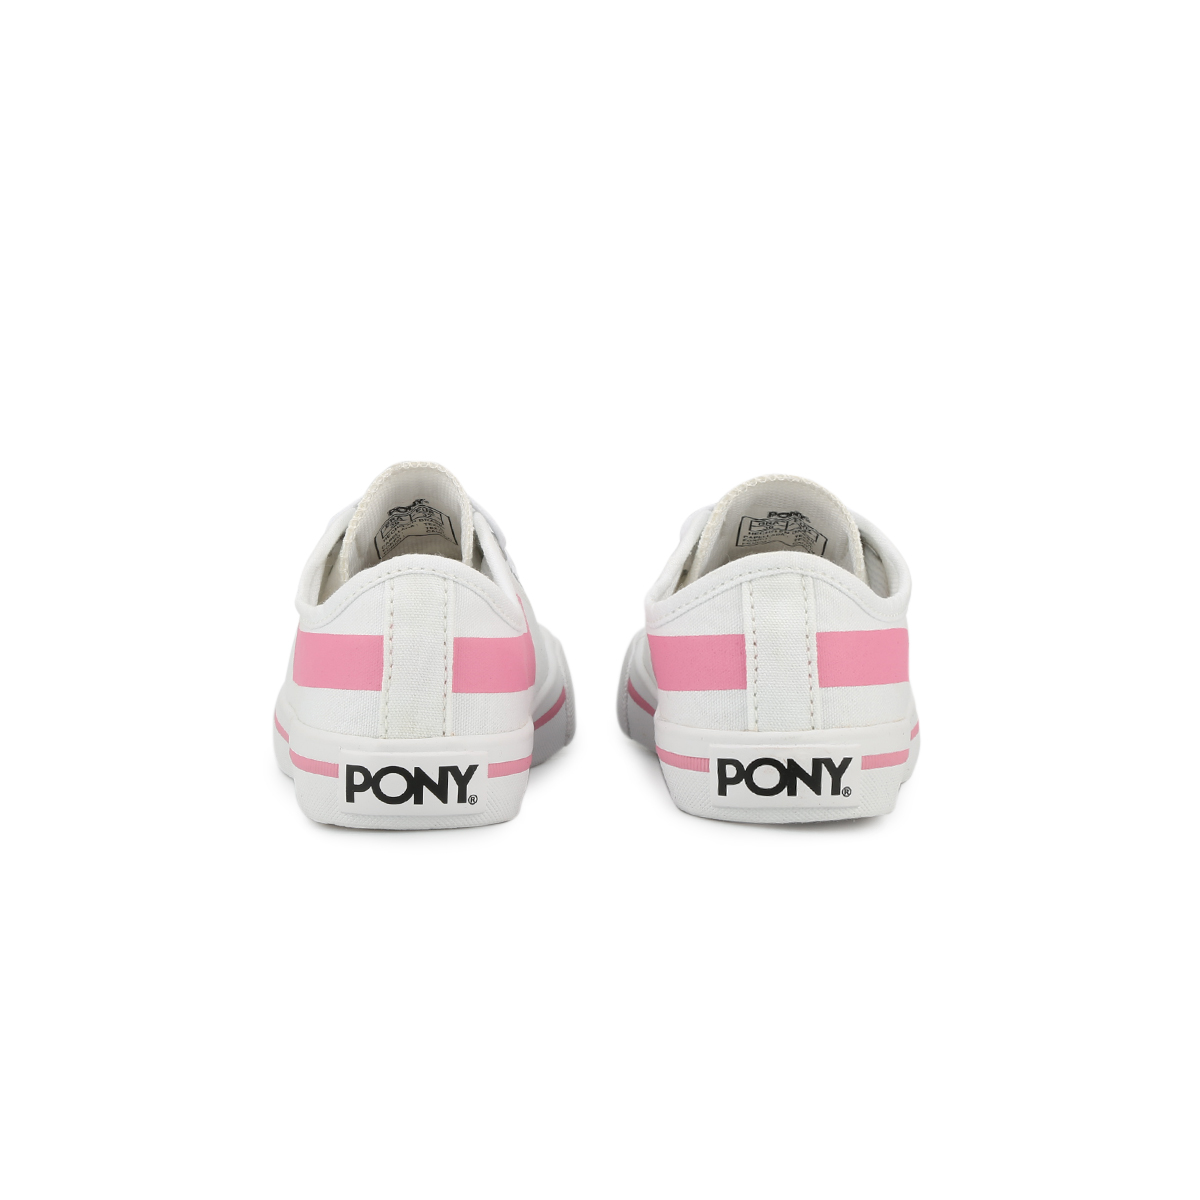 Zapatillas Pony Shooter Ox Canvas,  image number null